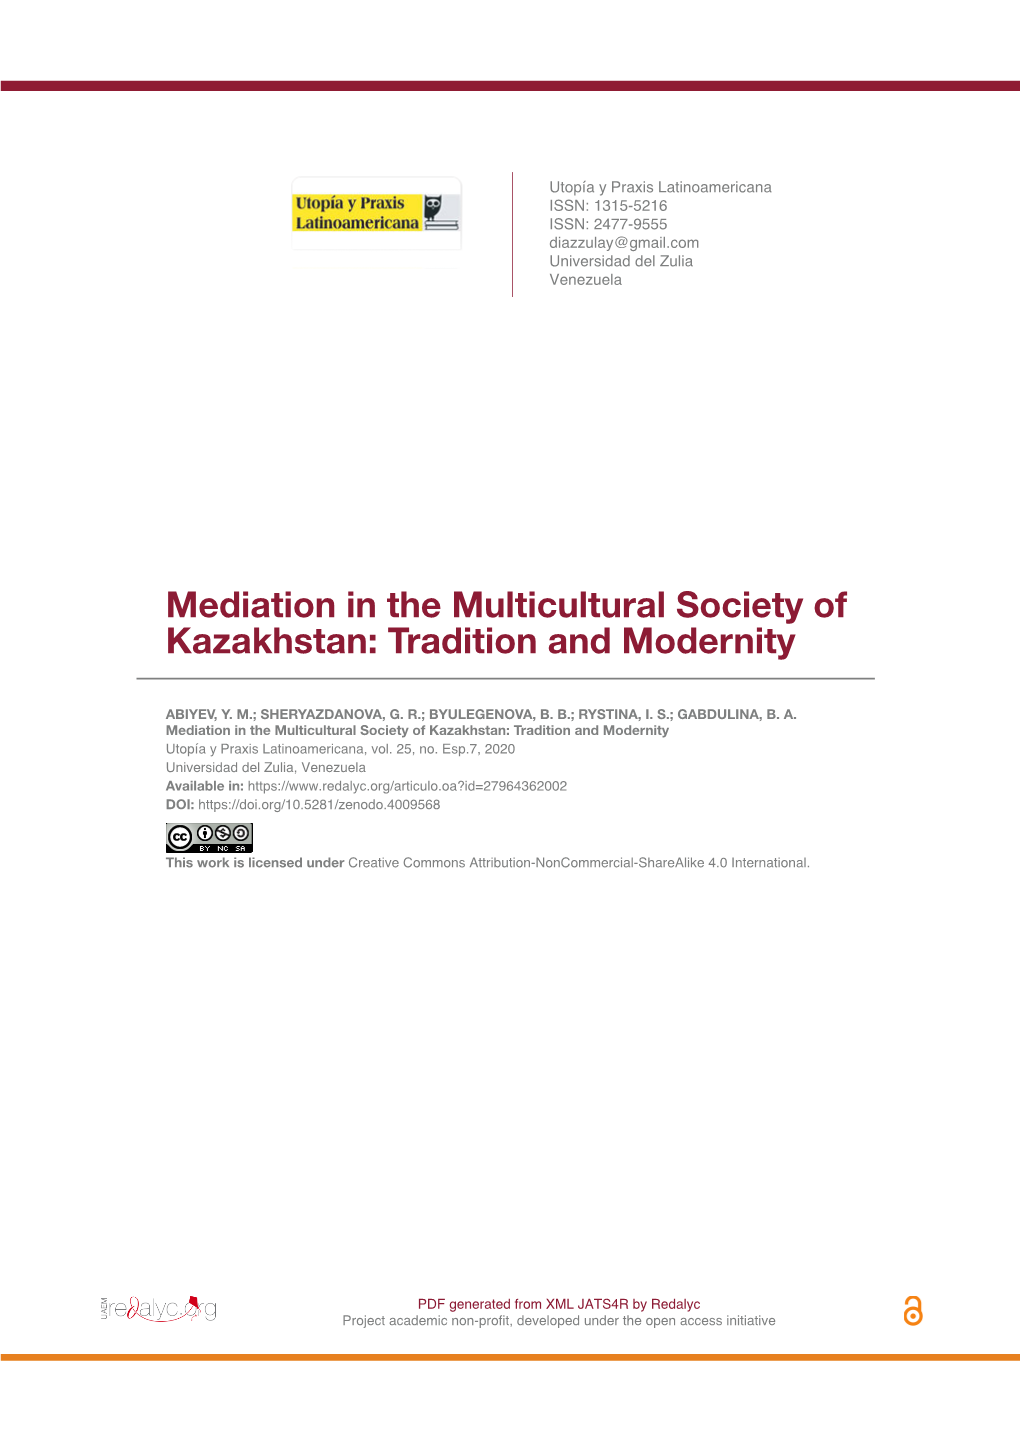 Mediation in the Multicultural Society of Kazakhstan: Tradition and Modernity